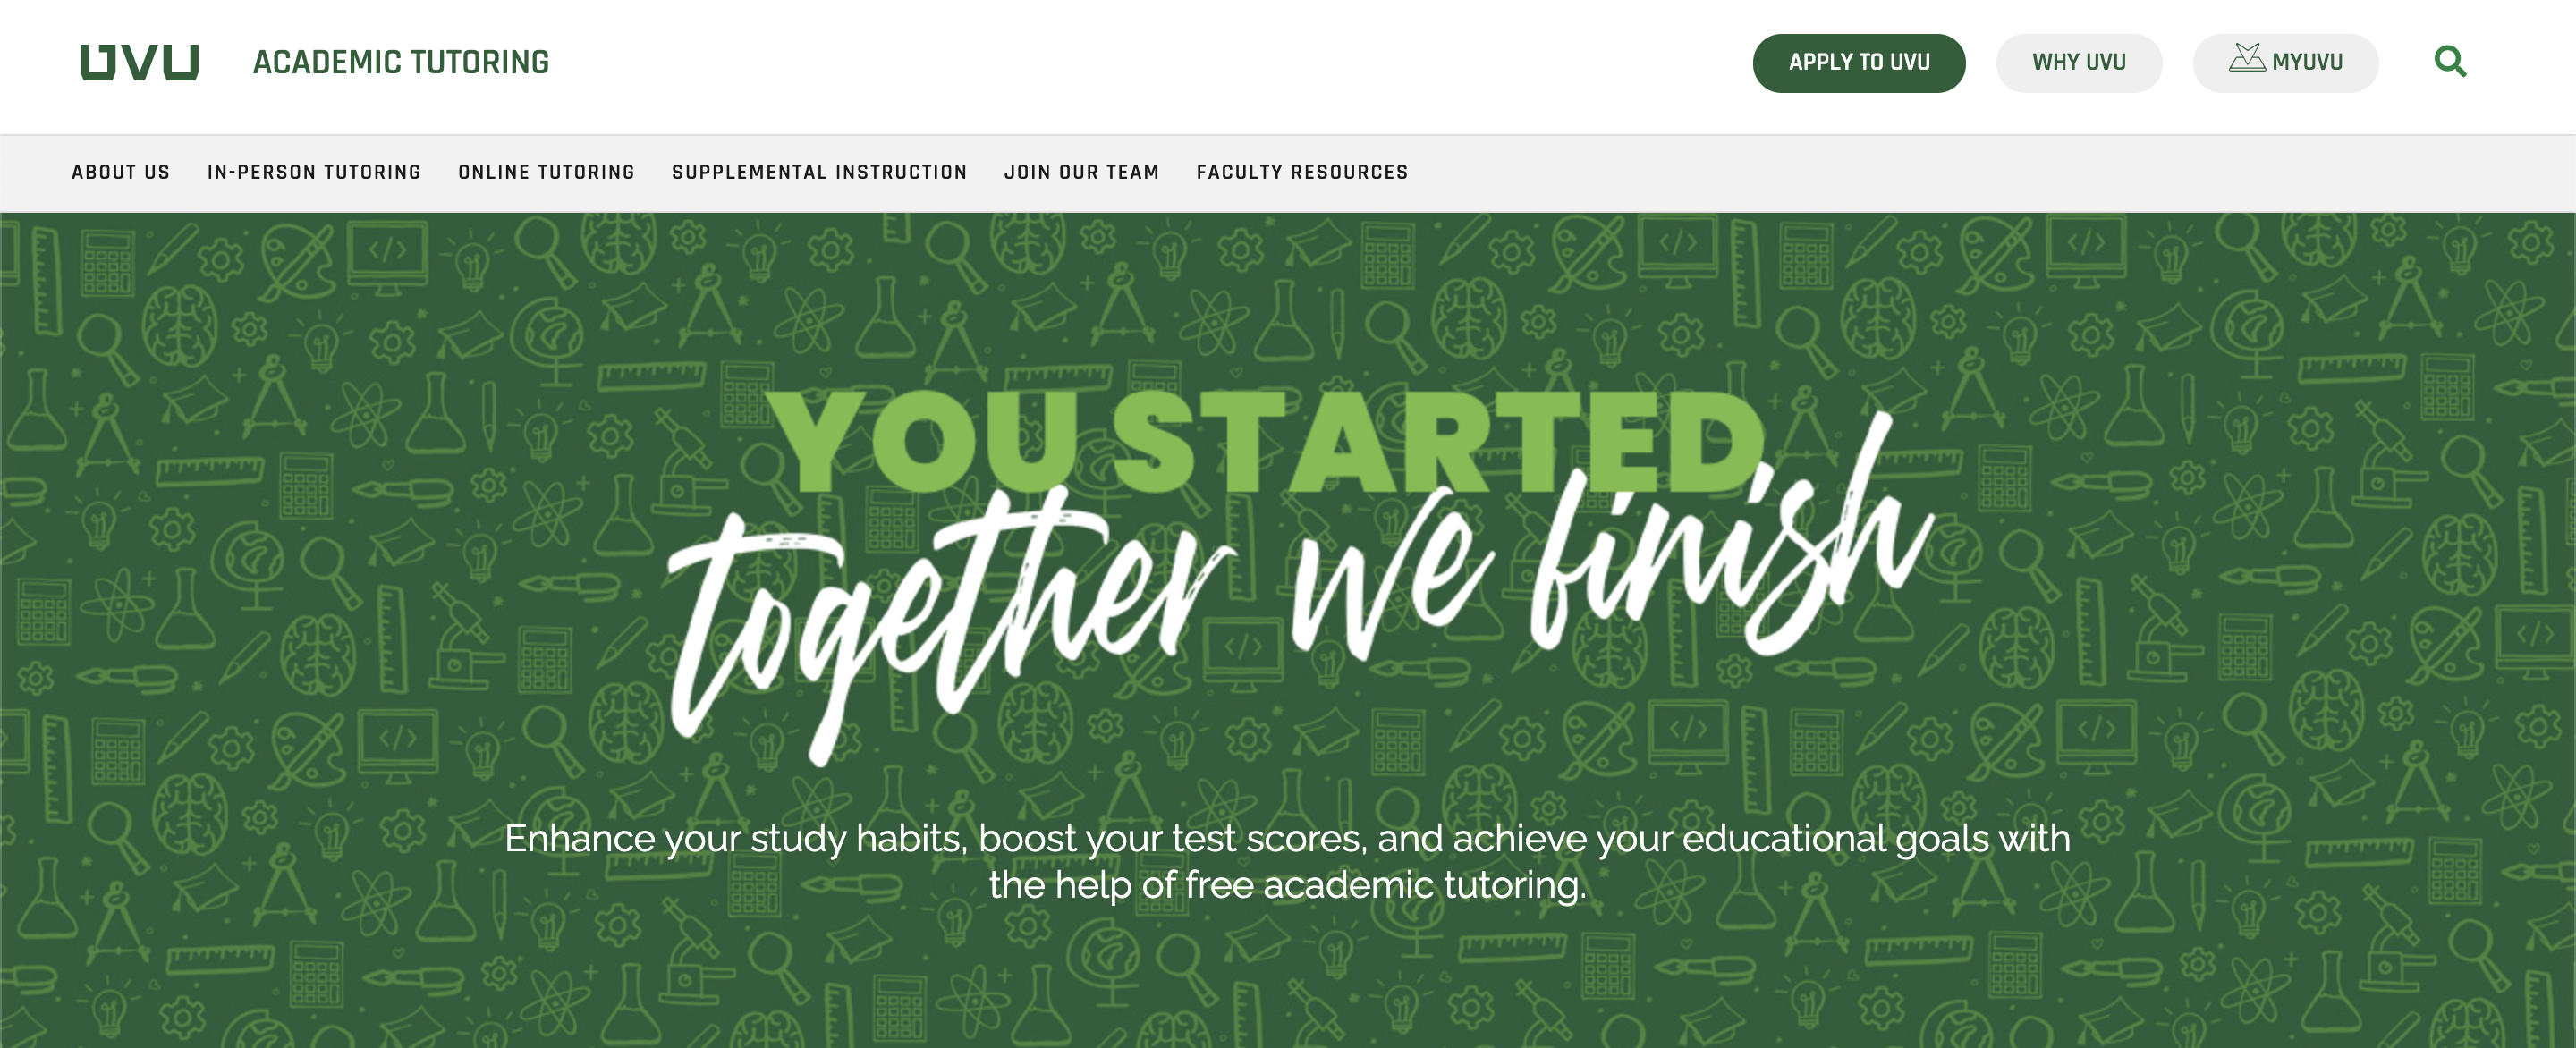 image of the Academic Tutoring home page